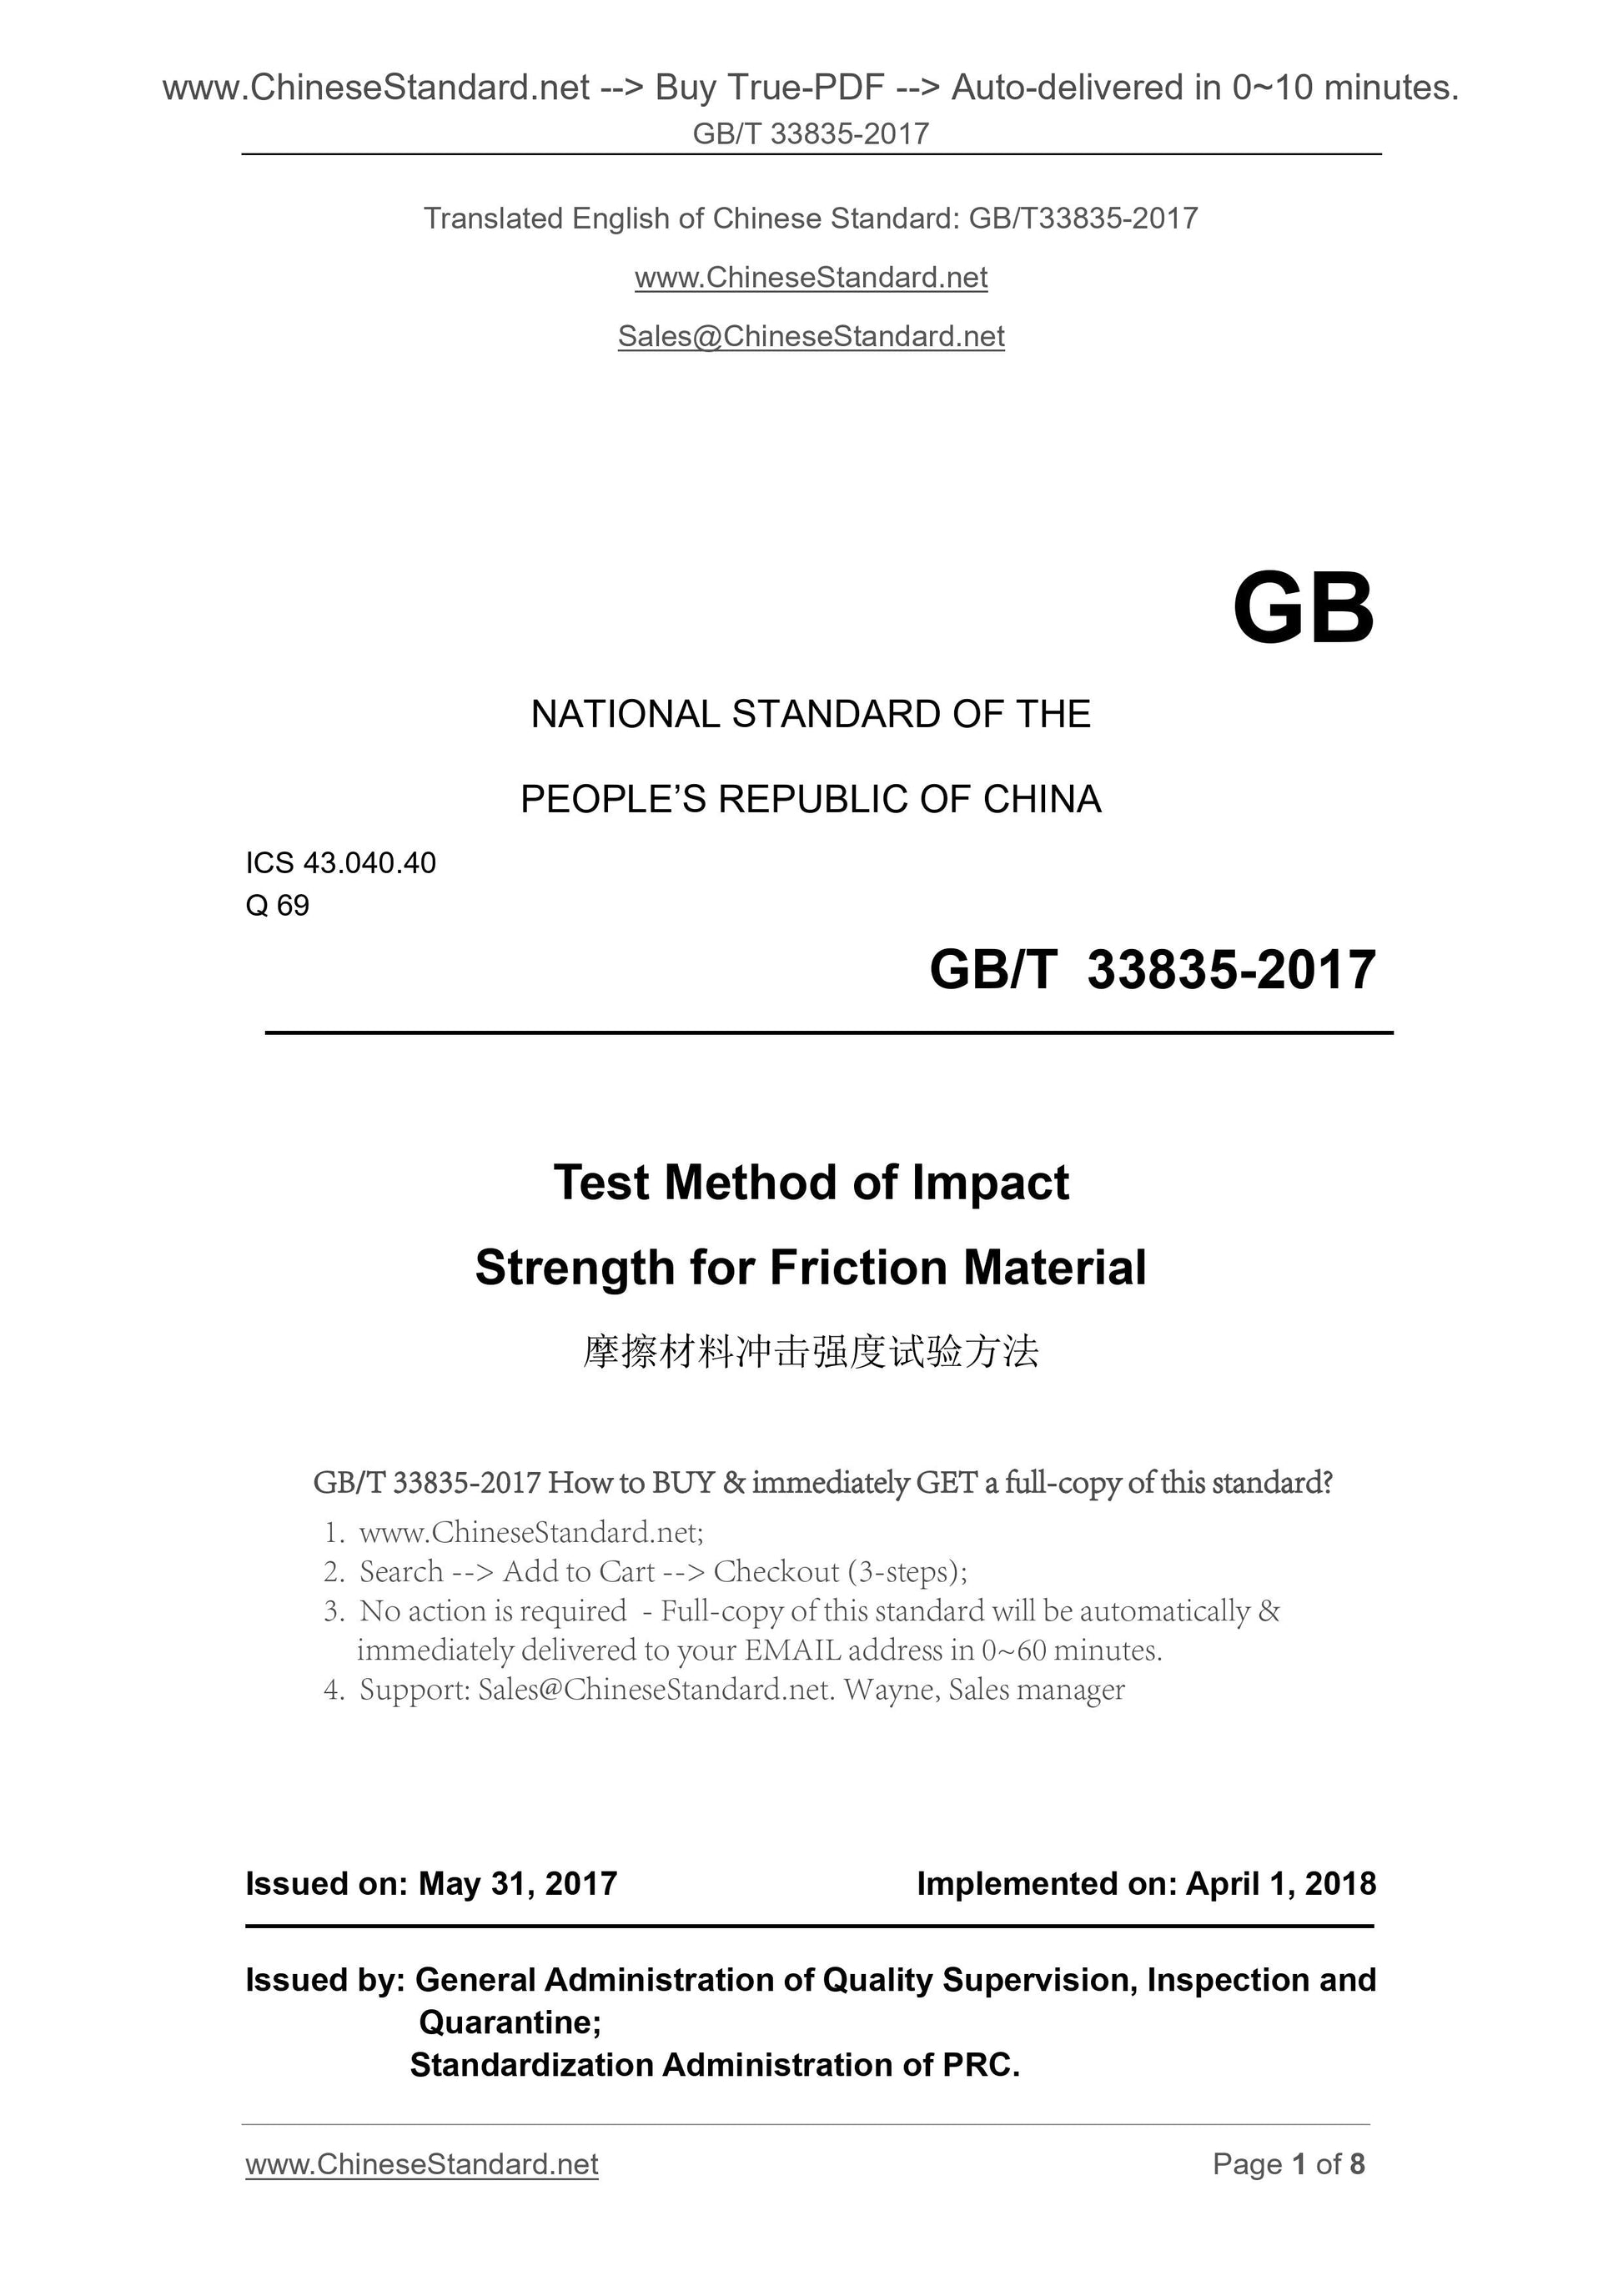 GB/T 33835-2017 Page 1